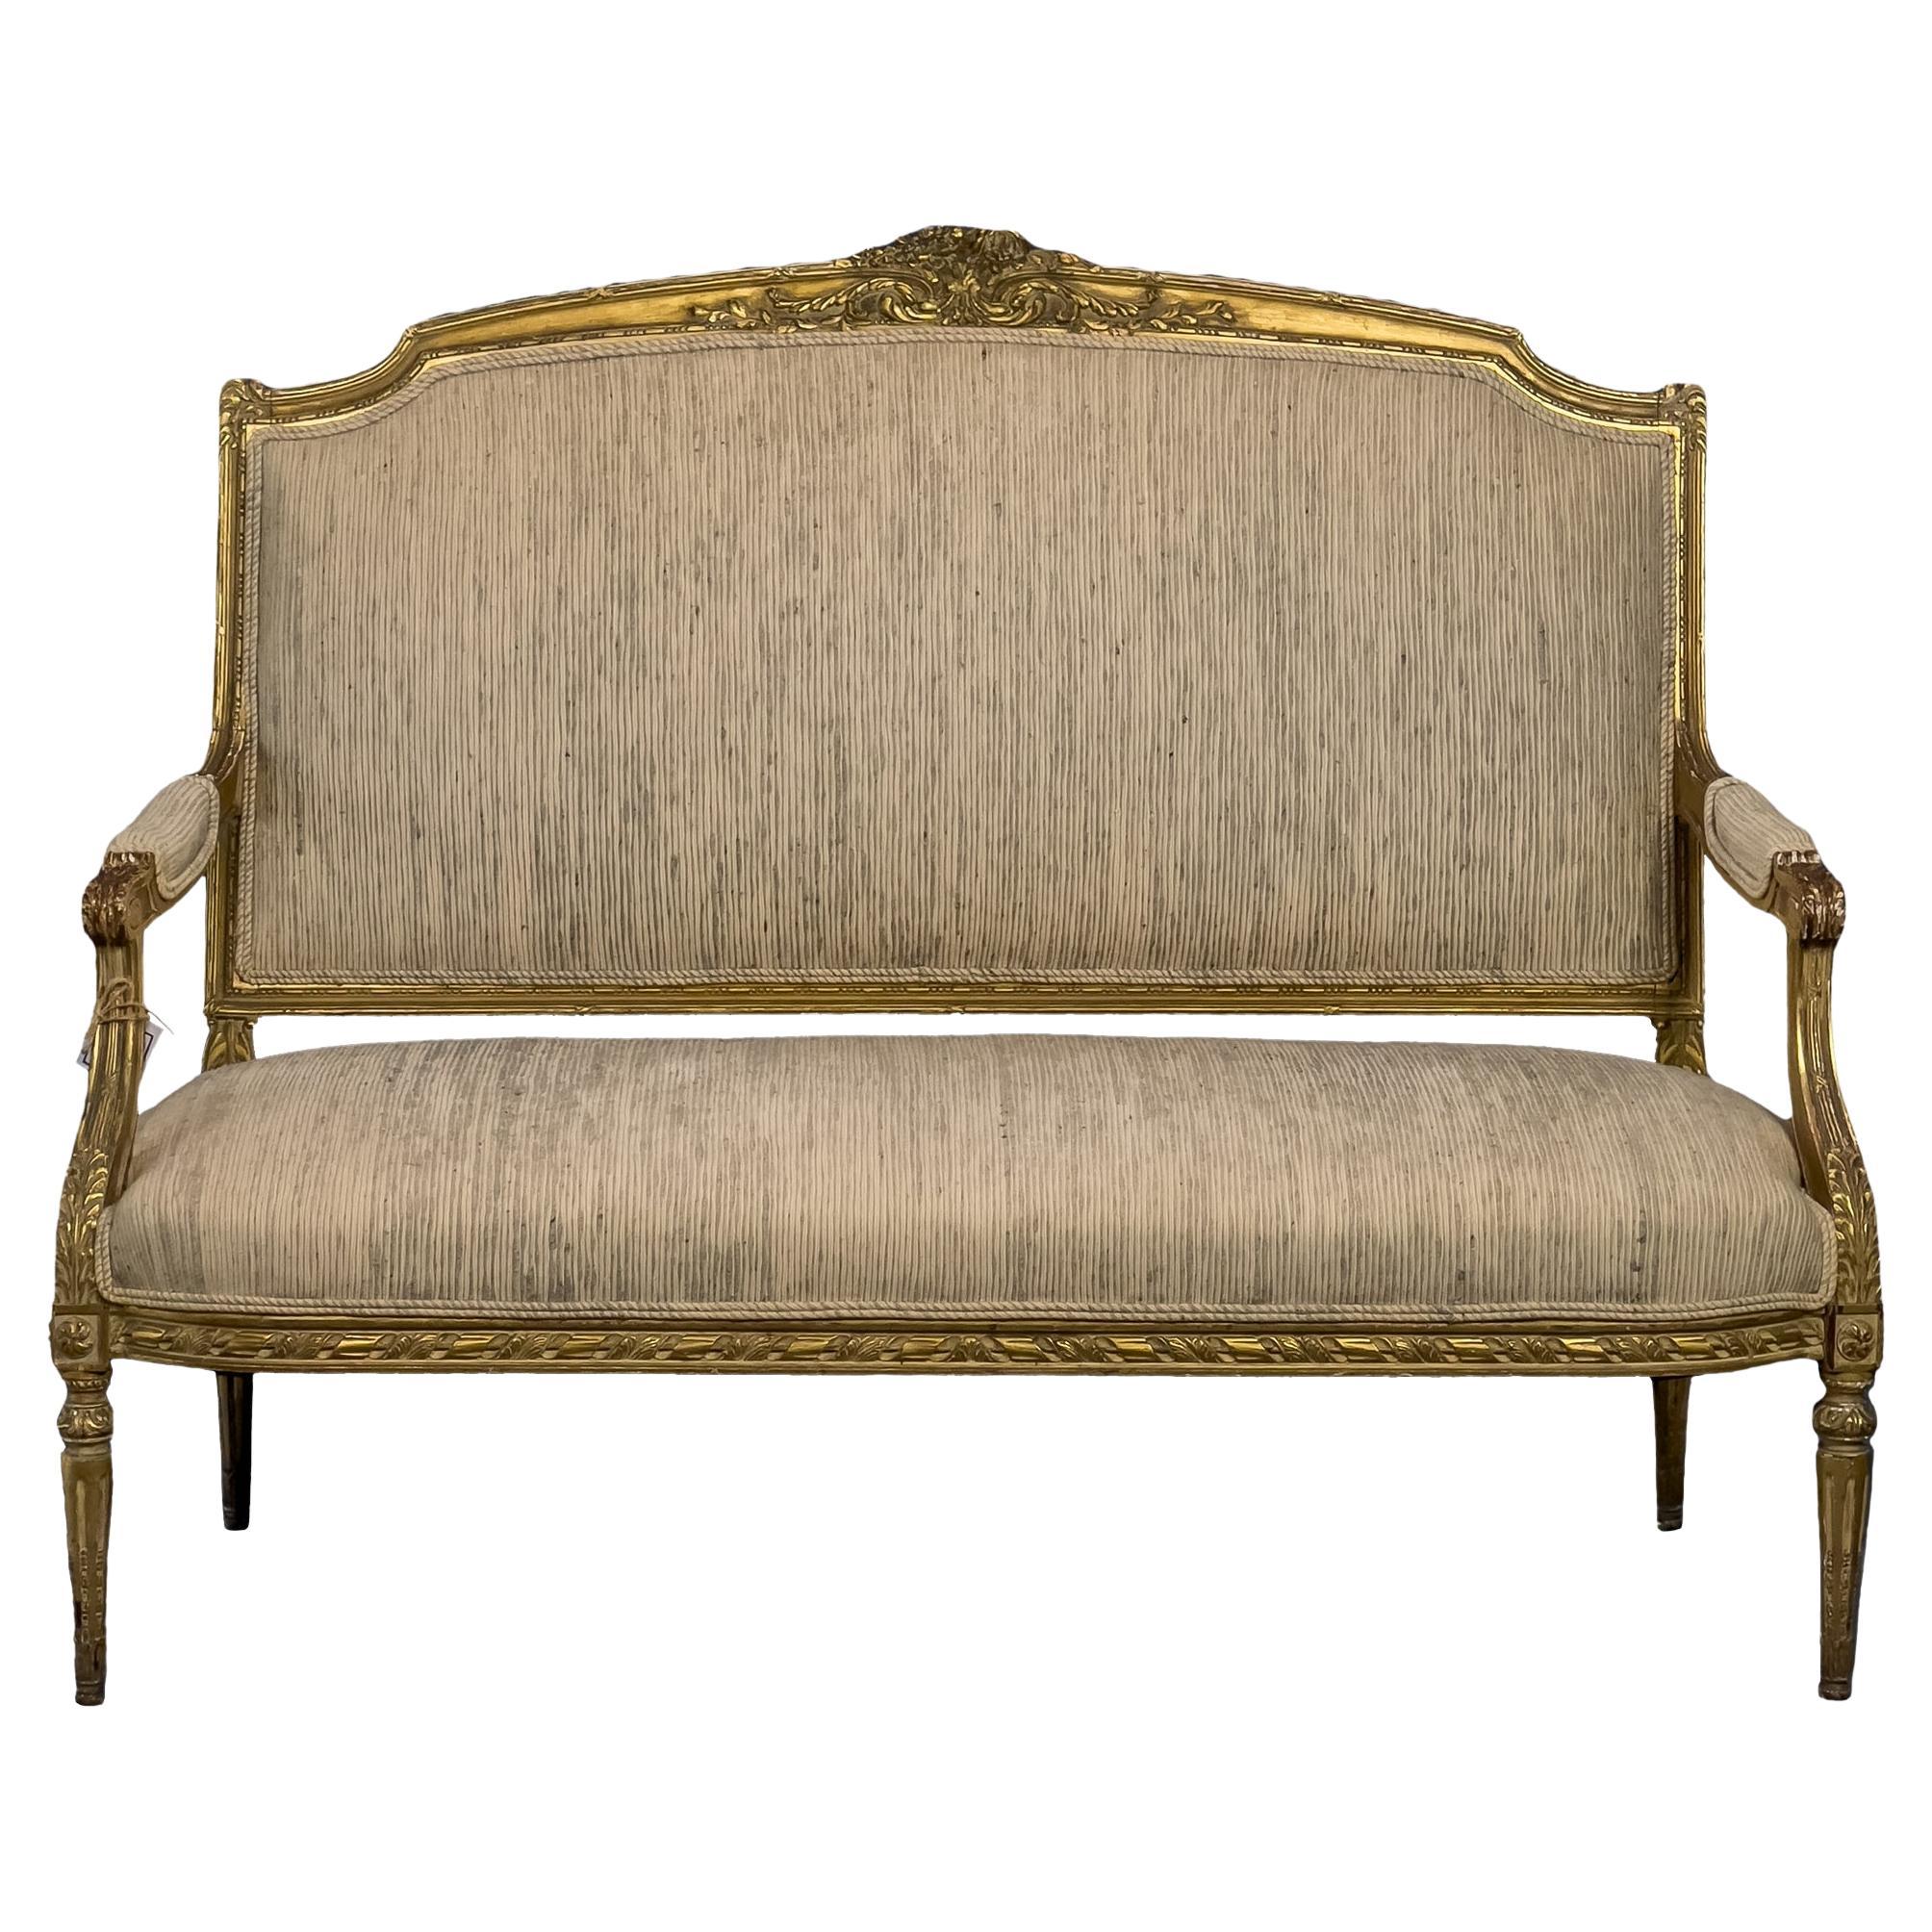 Antique Louis XVI Gilt and Wood Settee